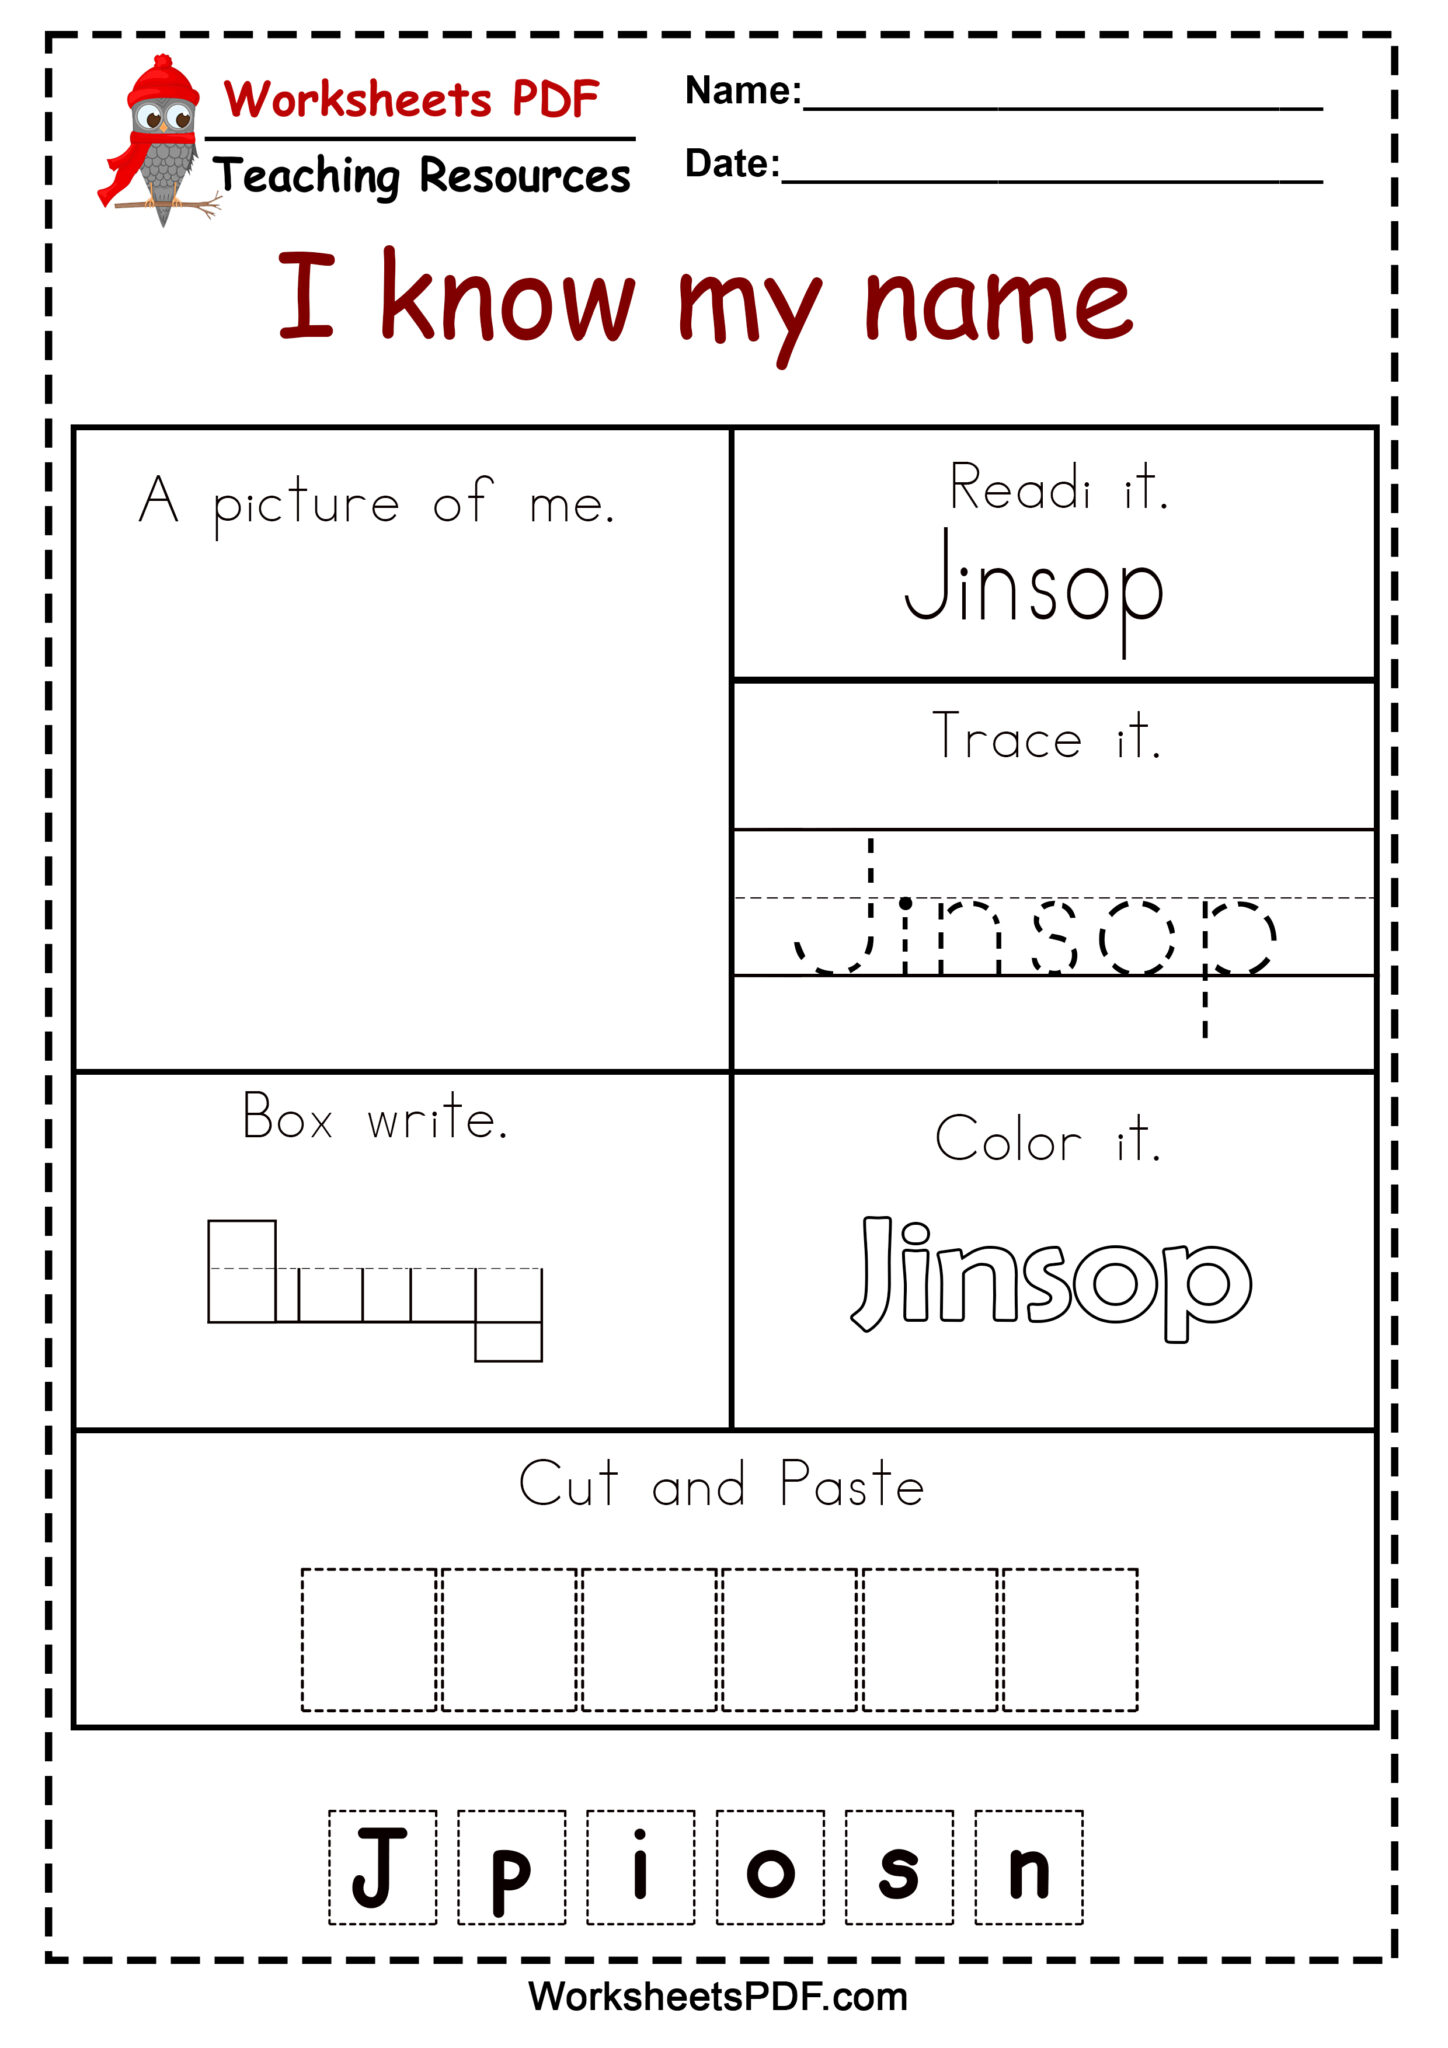 print-activities-tracing-letters-names-tracinglettersworksheets